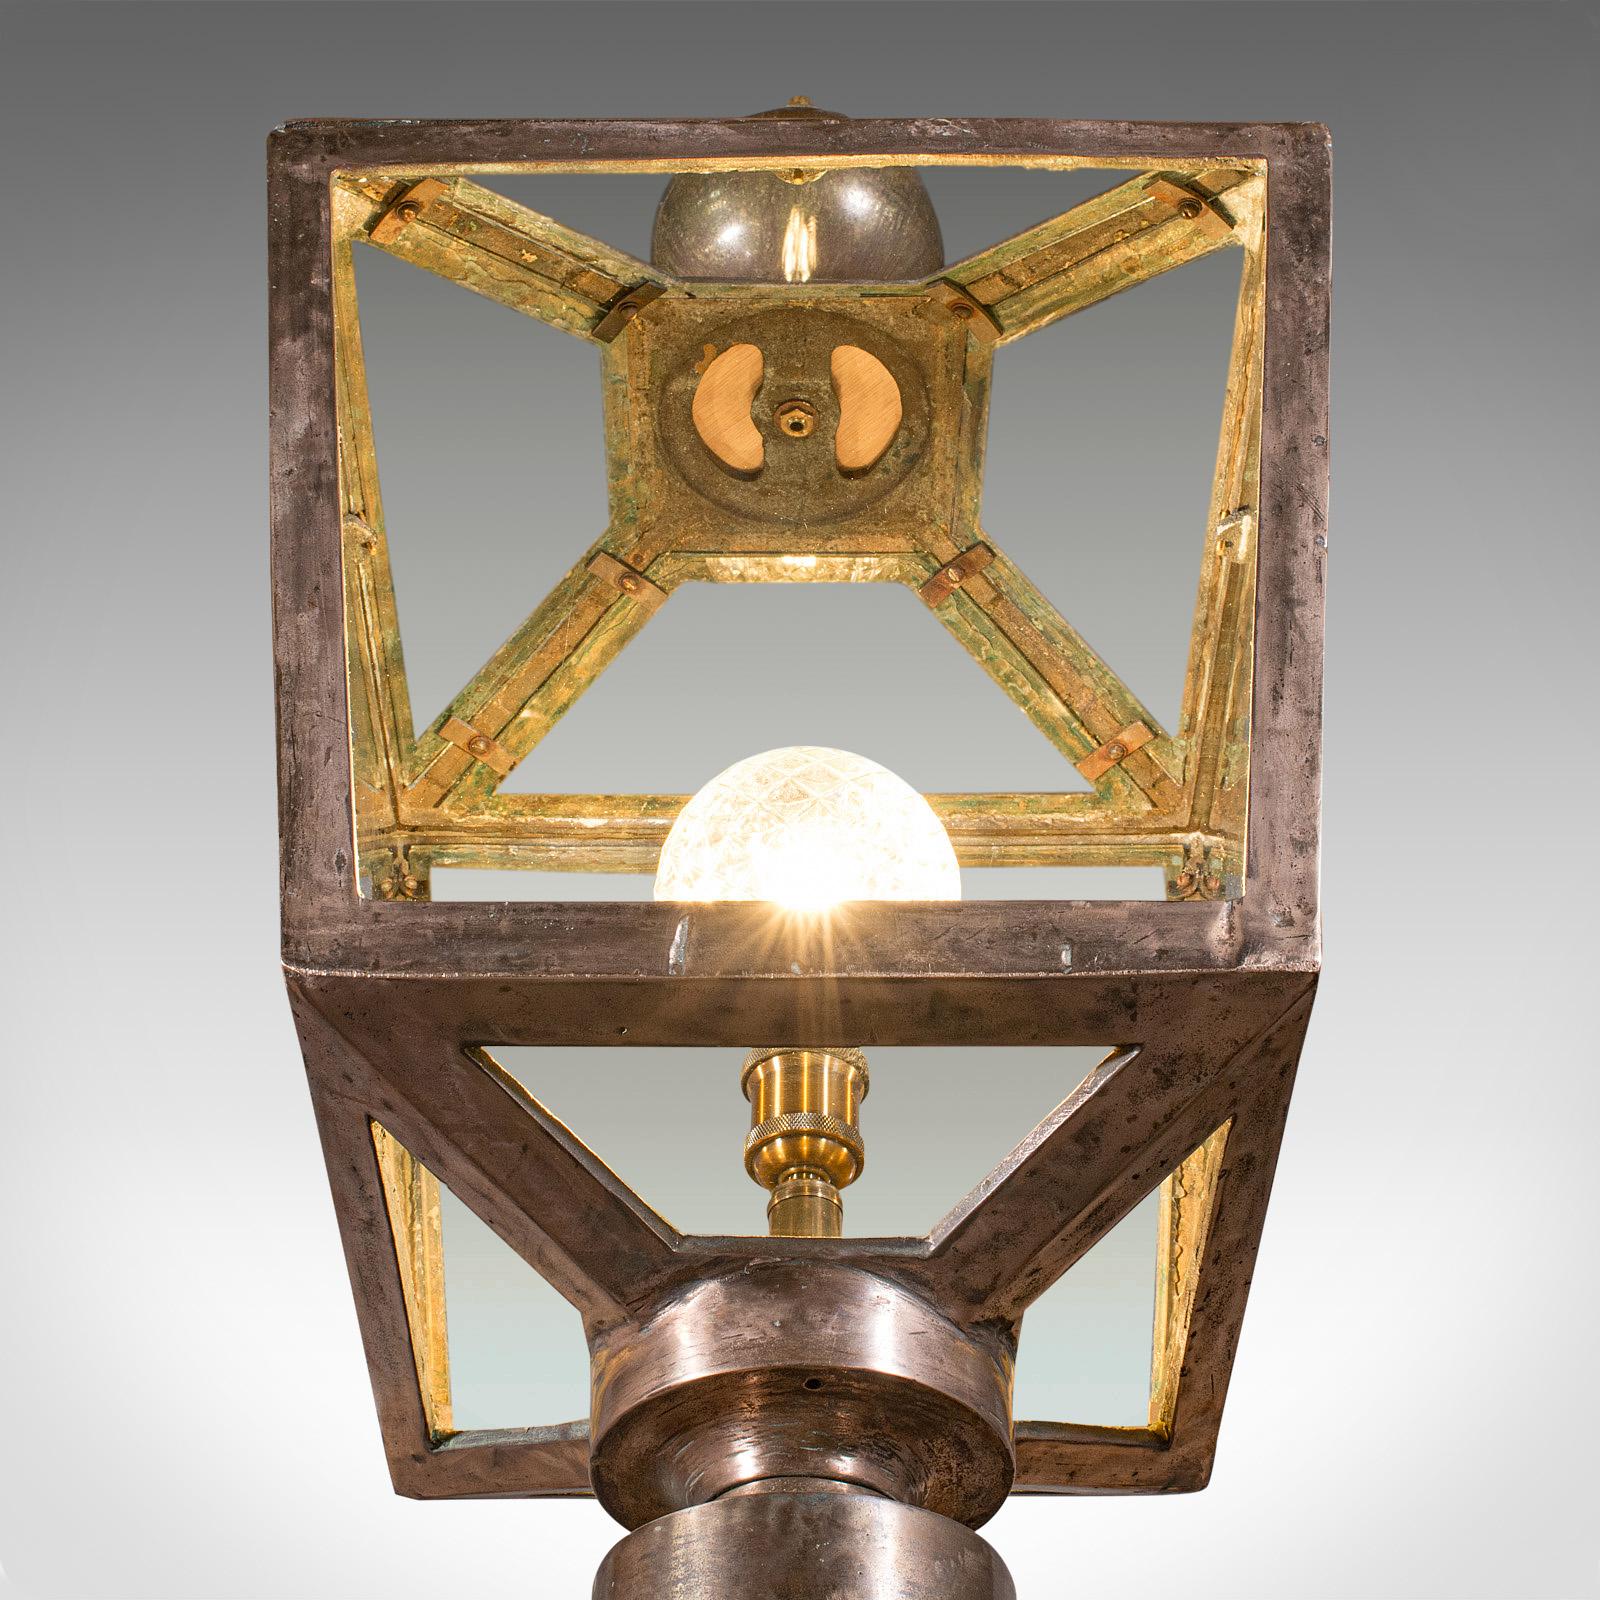 Large Antique Courtyard Light, English, Bronze, Outdoor Lamp, Victorian, C.1870 For Sale 2